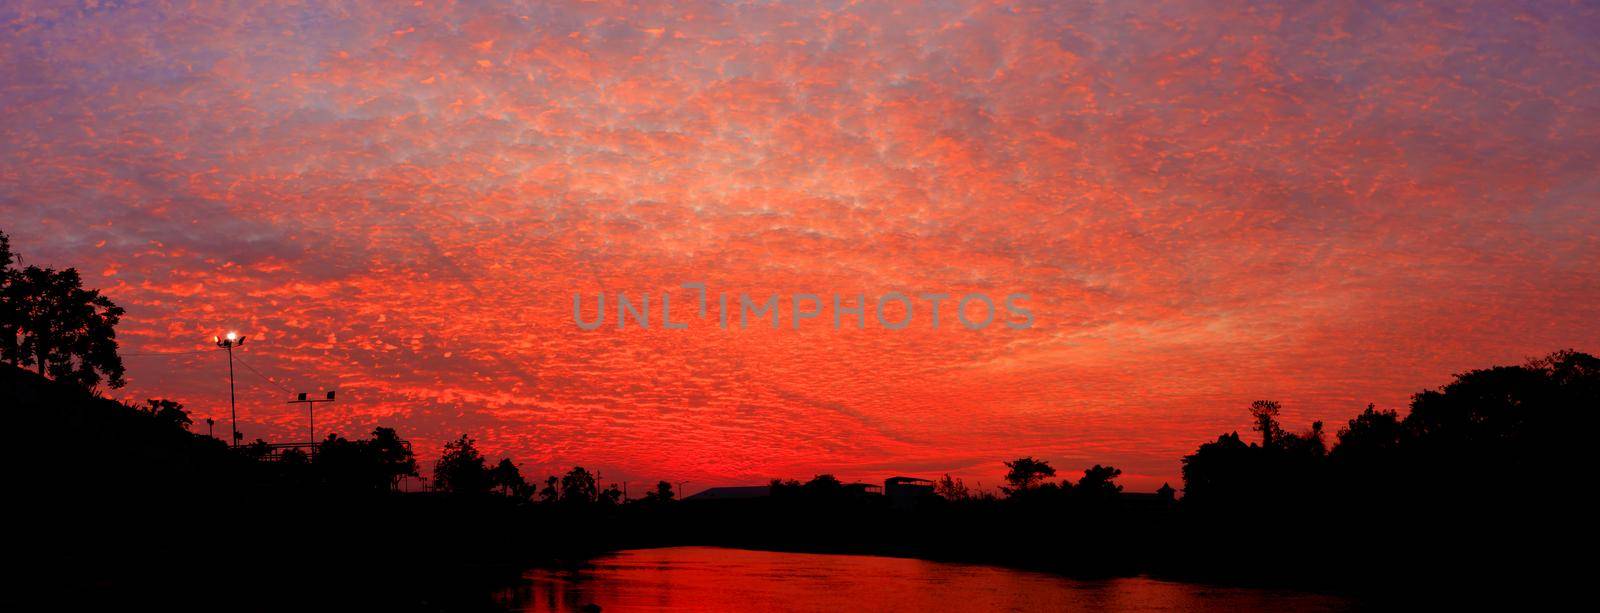 panorama sunset in red sky beautiful colorful landscape silhouette tree woodland and river reflect the twilight time